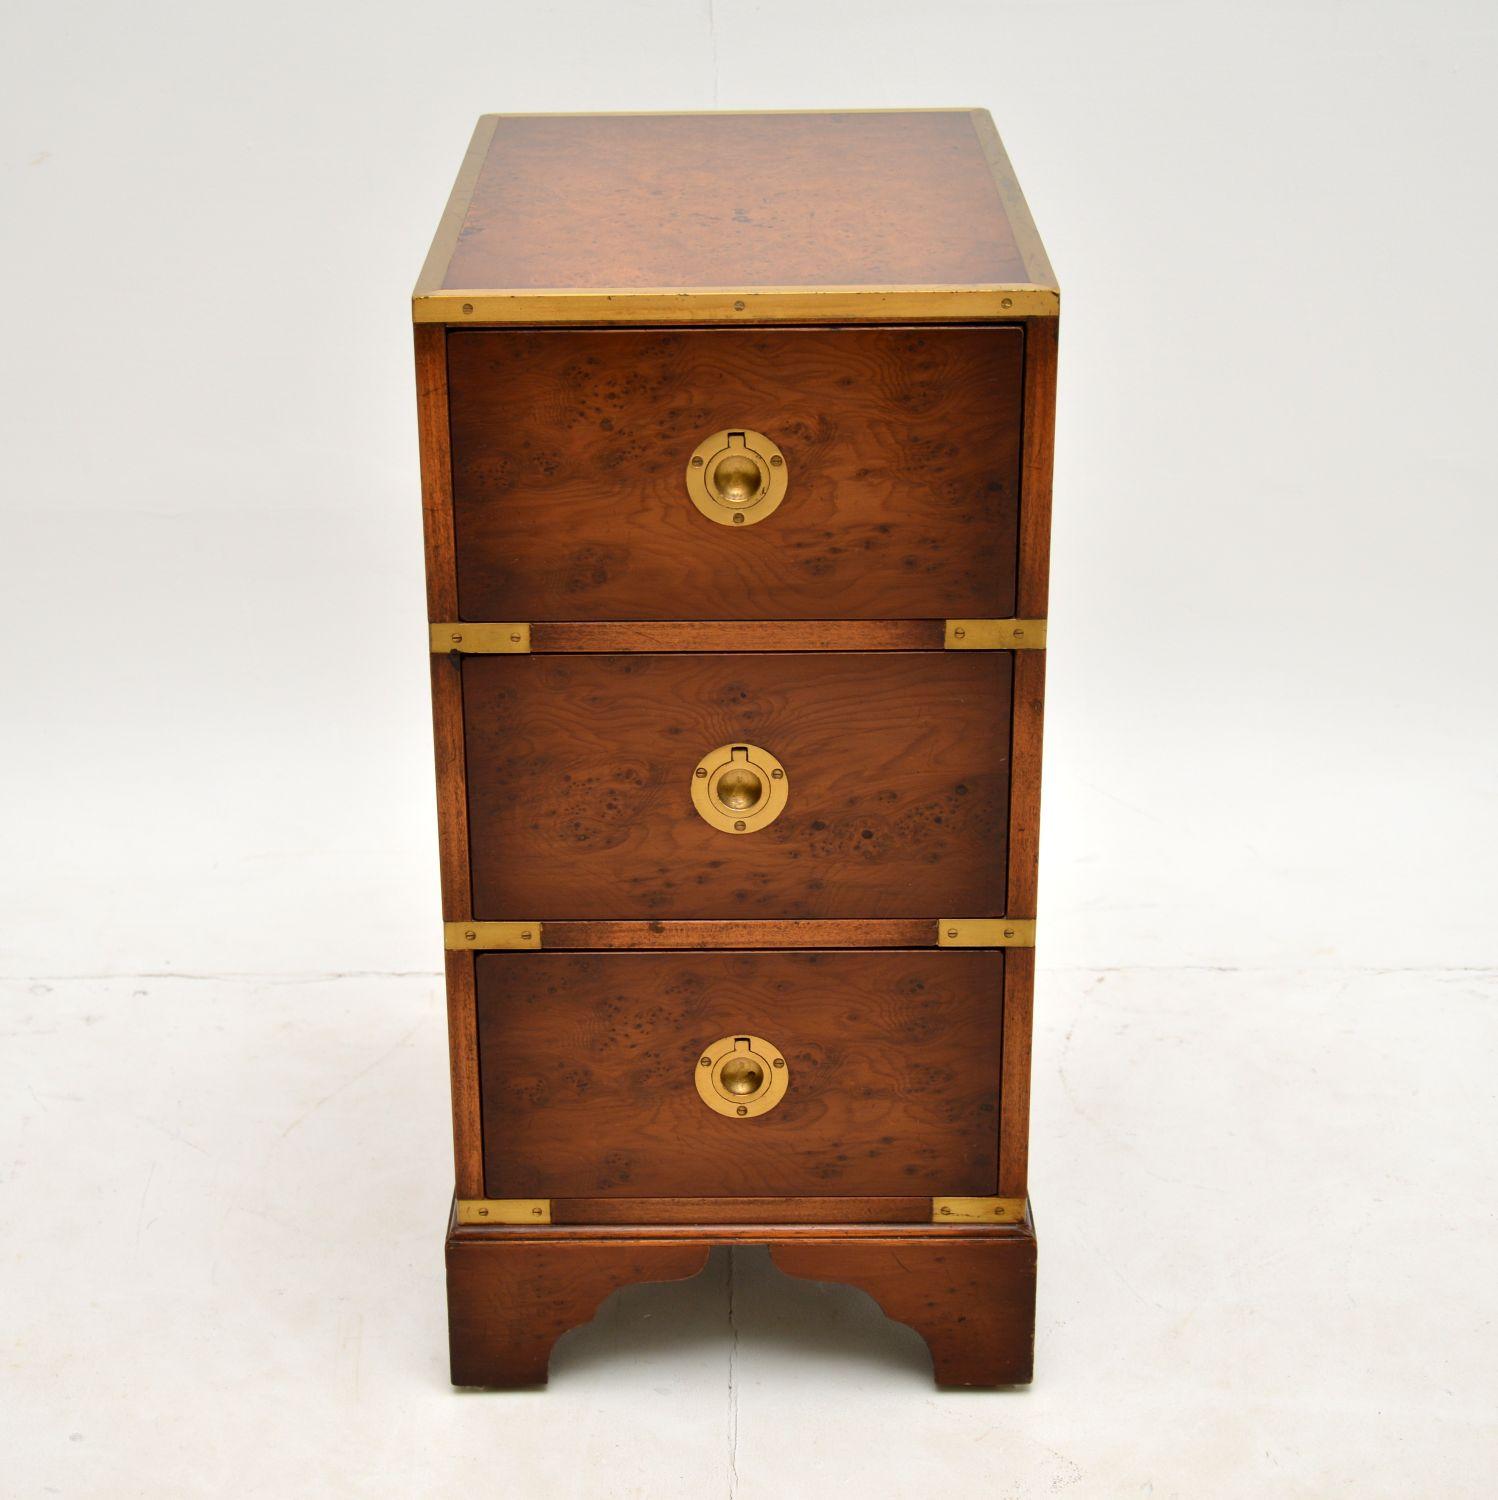 A lovely small side chest of drawers in the antique military campaign style. This was made in England, it dates from around the 1950’s.

It is a lovely size and is of great quality. There are stunning burr elm grain patterns throughout, offset by